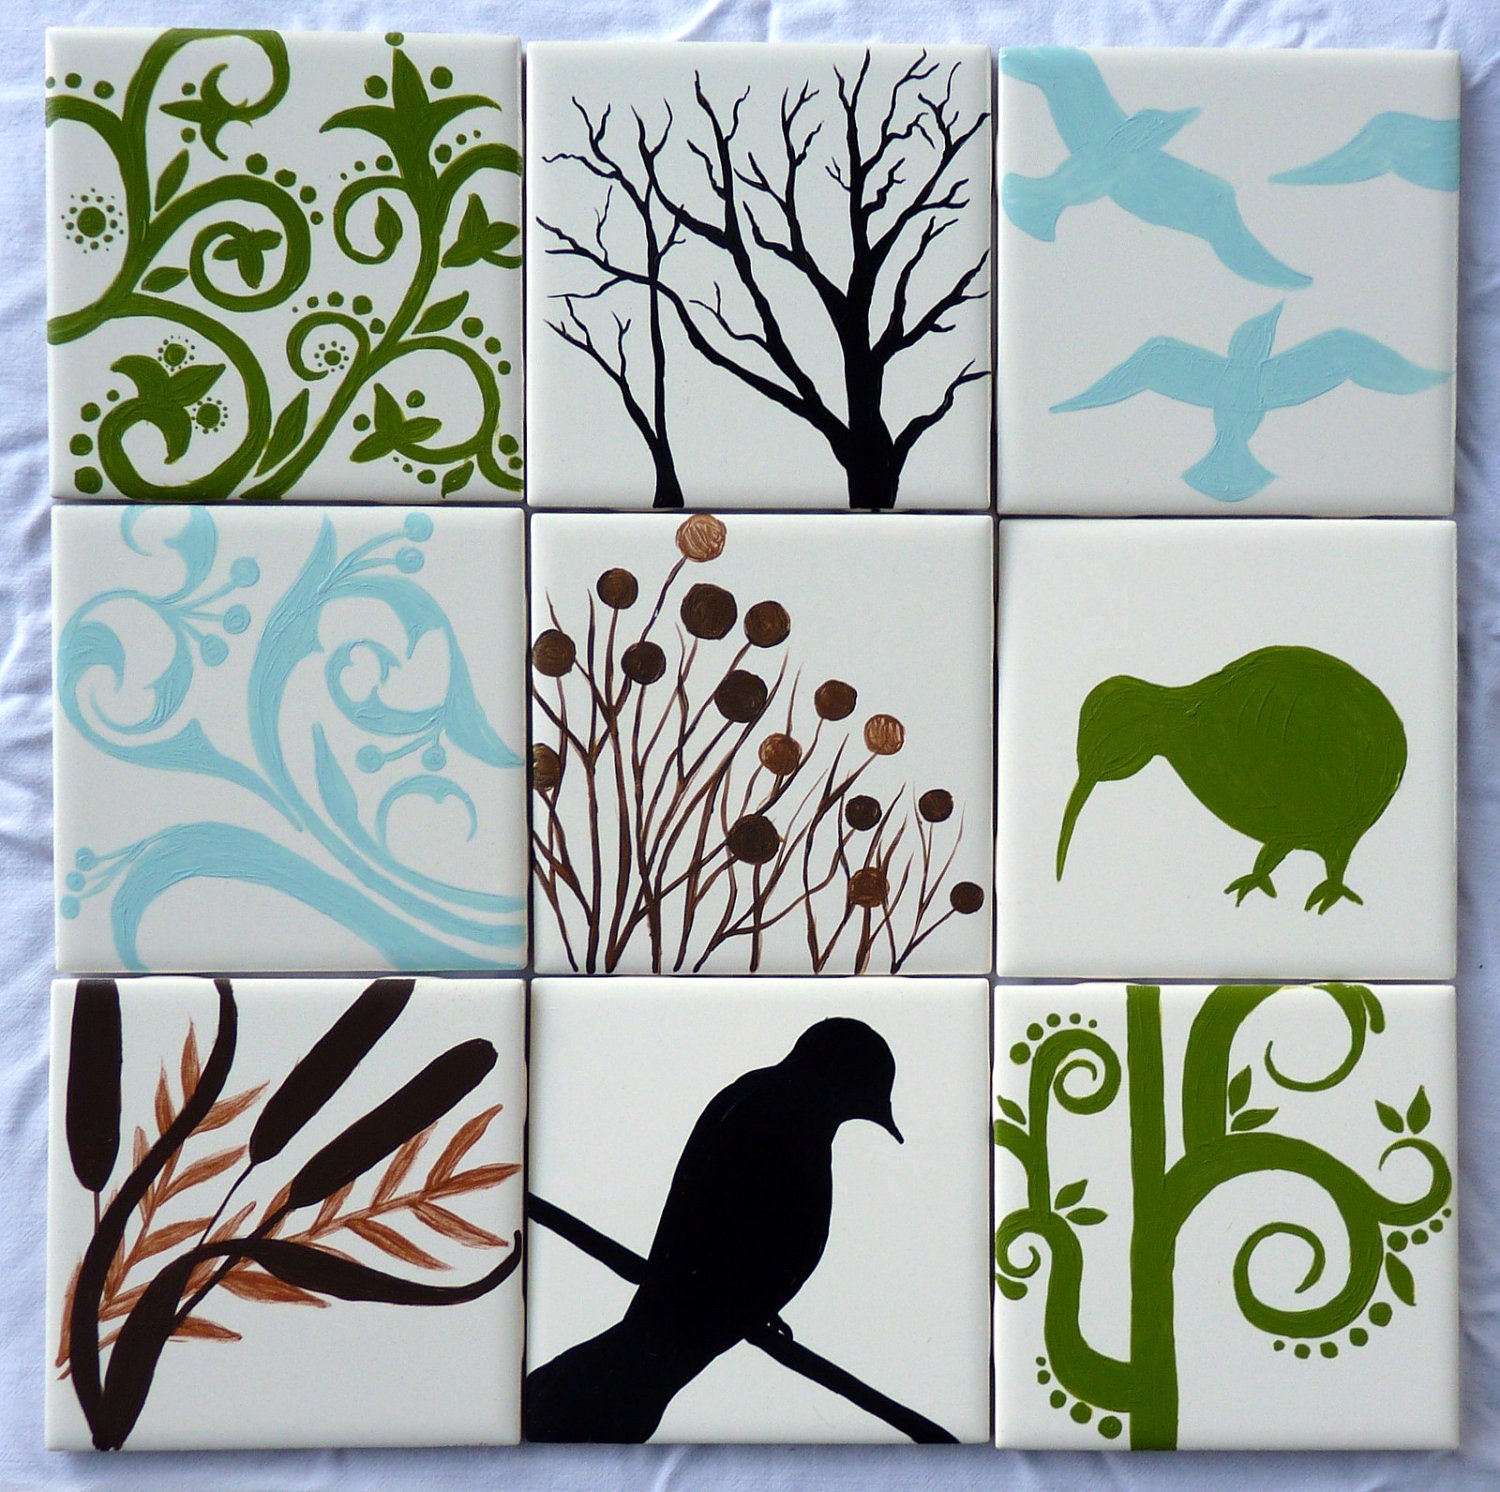 Set of Nine (9) Nature-Themed Hand-Painted Ceramic Tiles